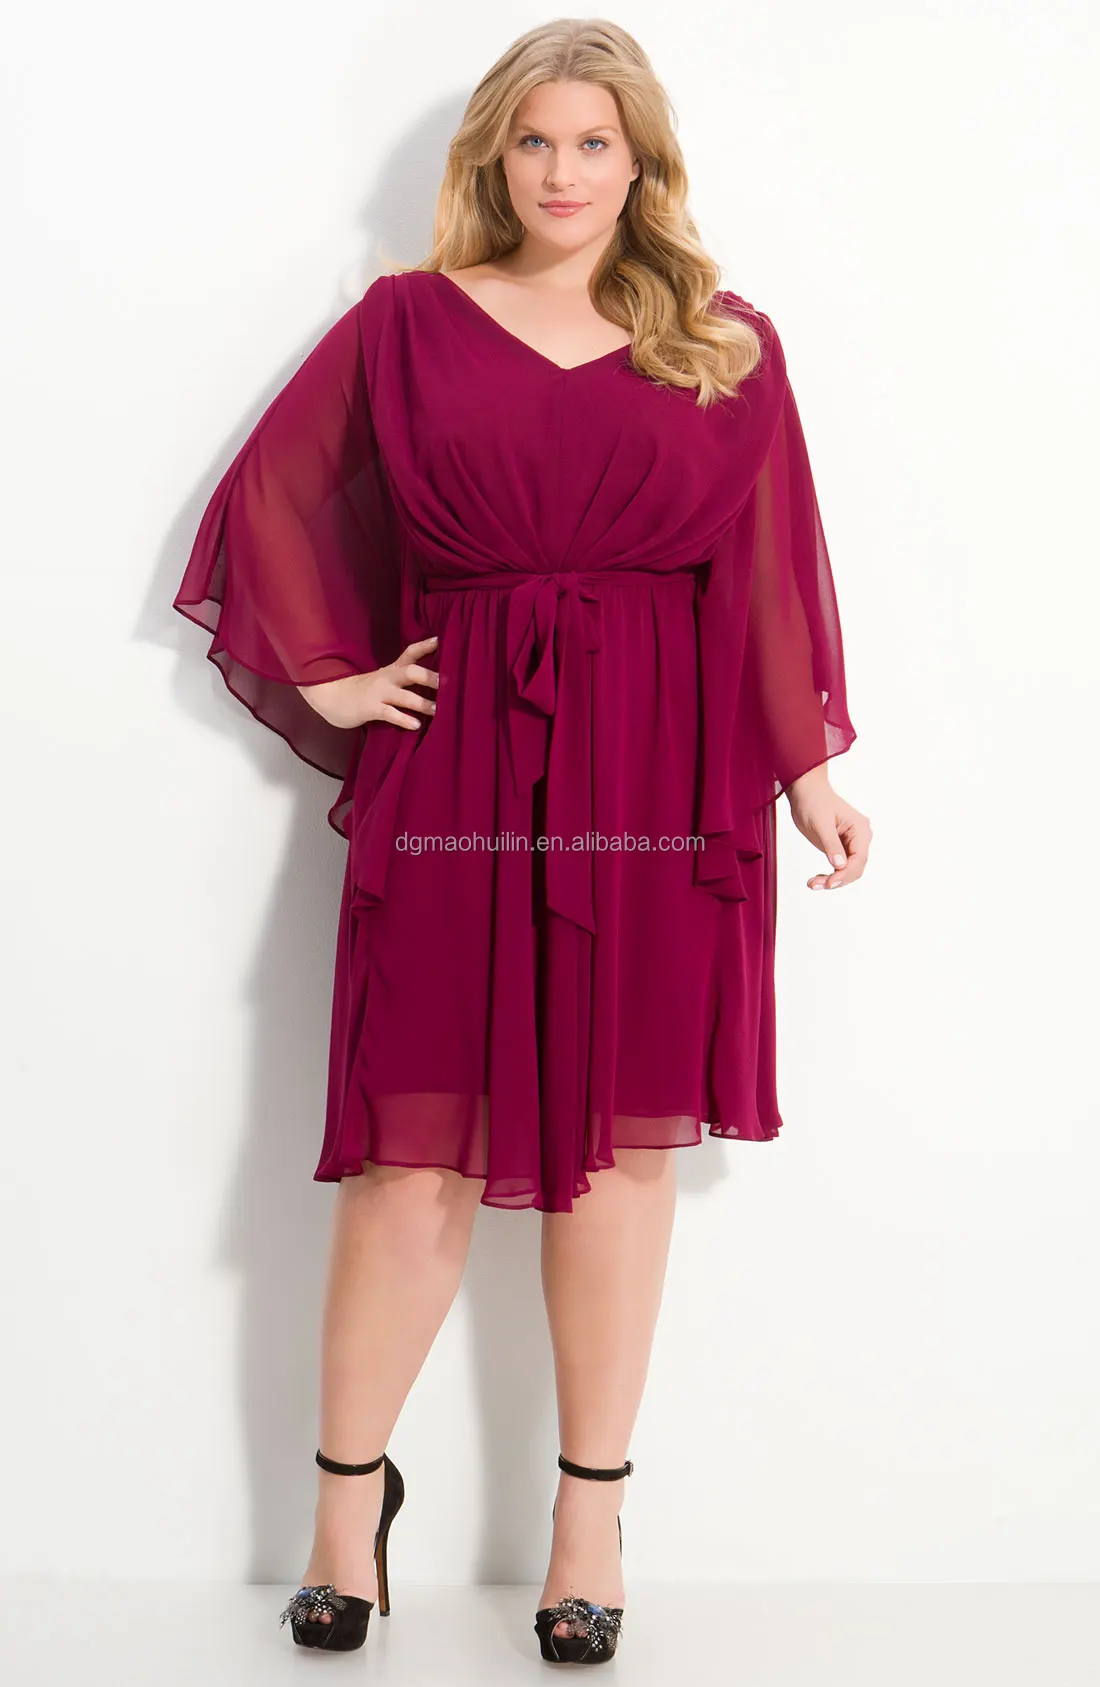 Fashion Fat Women Peacock Plus Size Prom Dress With Batwing Sleeve in The Elegant  Fashion For Fat Women for Current Ideas